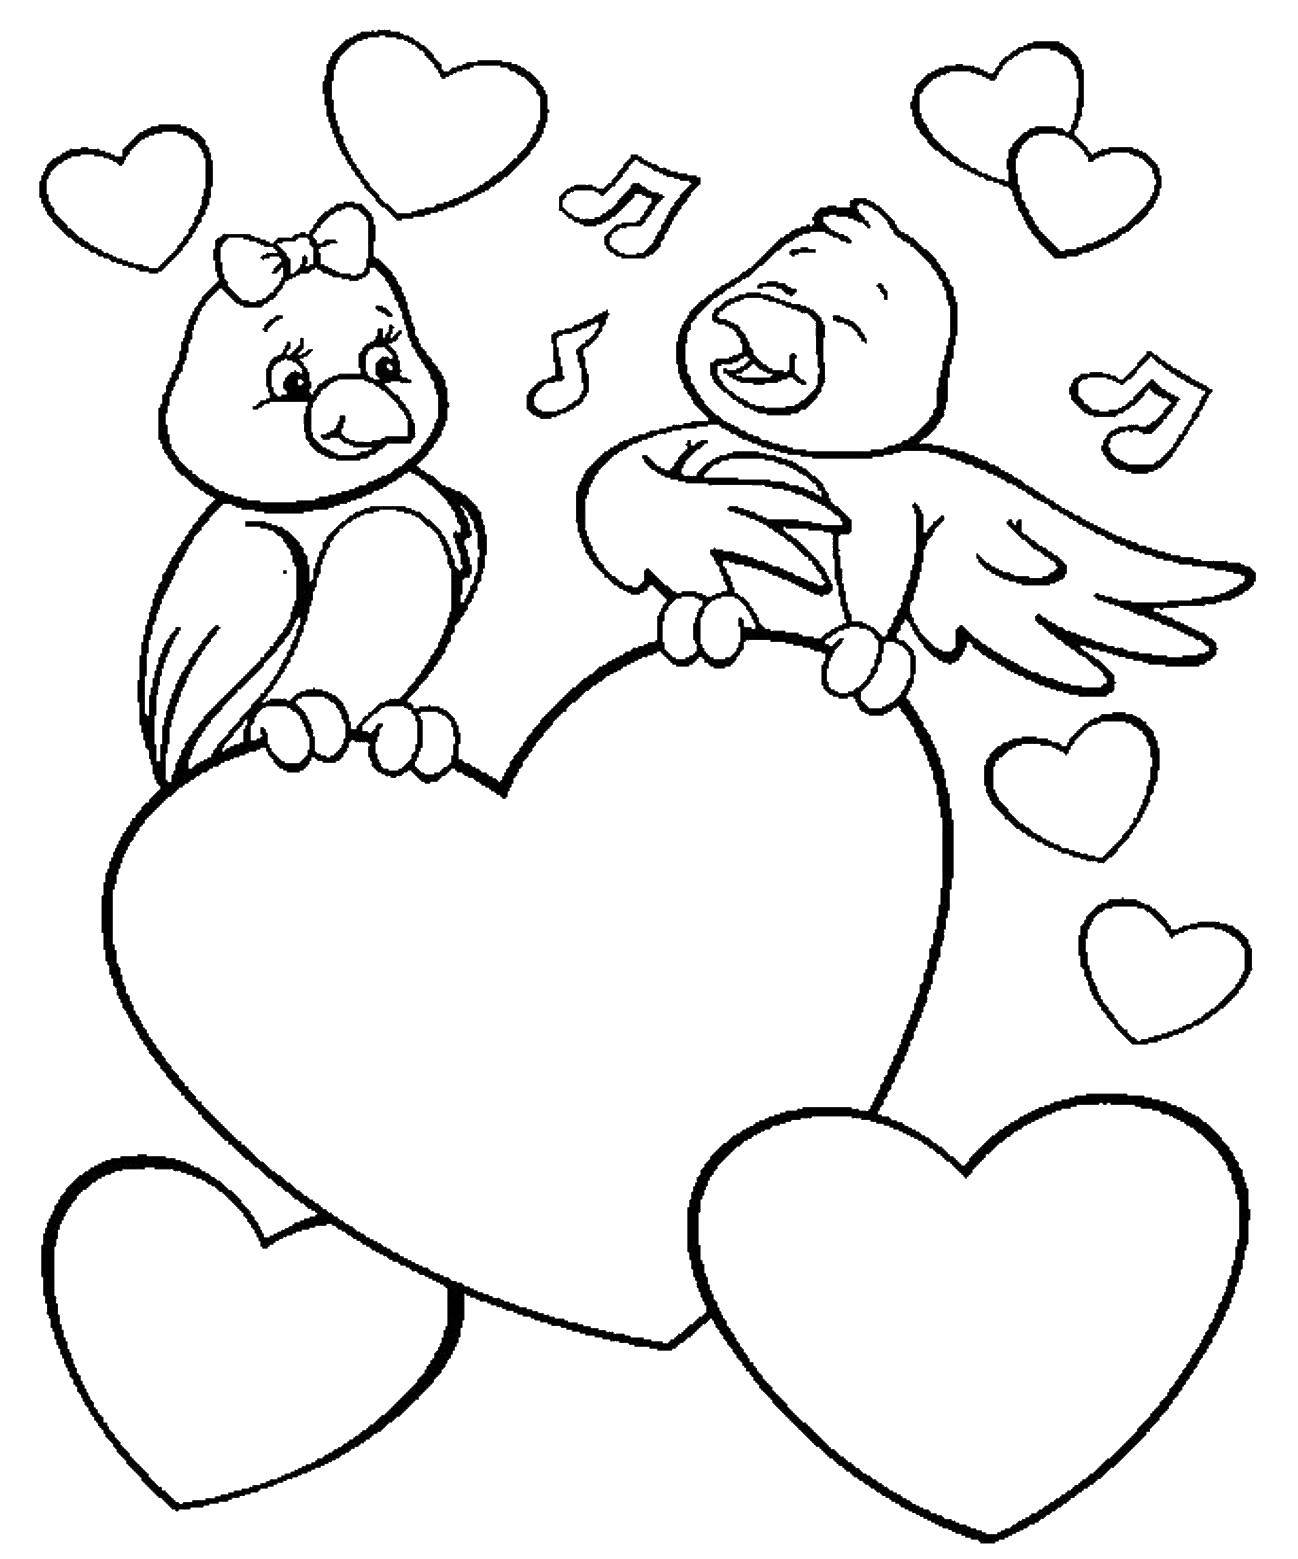 Coloring Two birds and hearts. Category I love you. Tags:  birds, hearts, music notes.